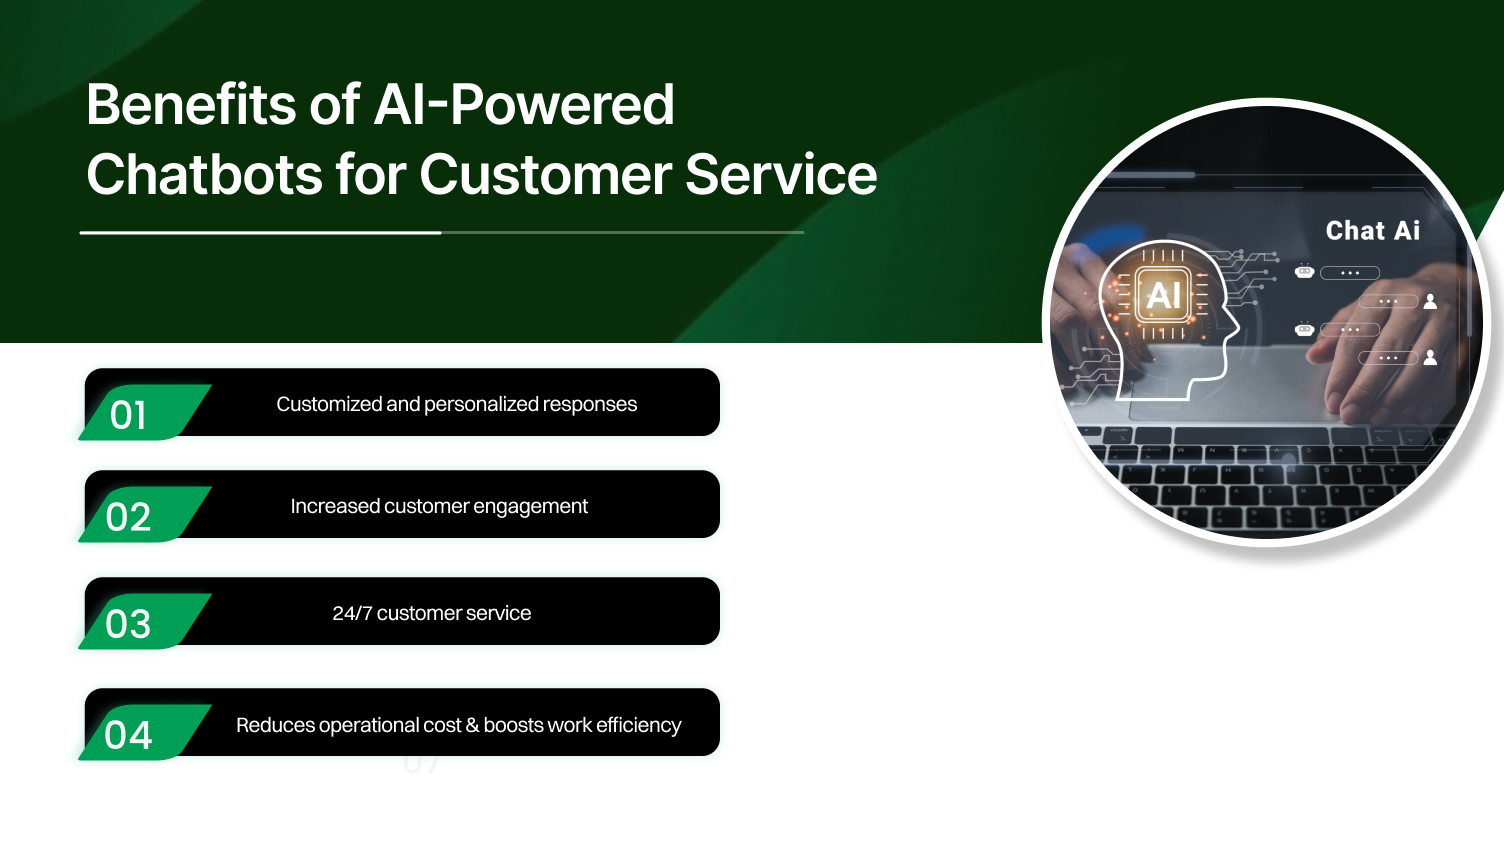 Benefits of AI-Powered Chatbots for Customer Service